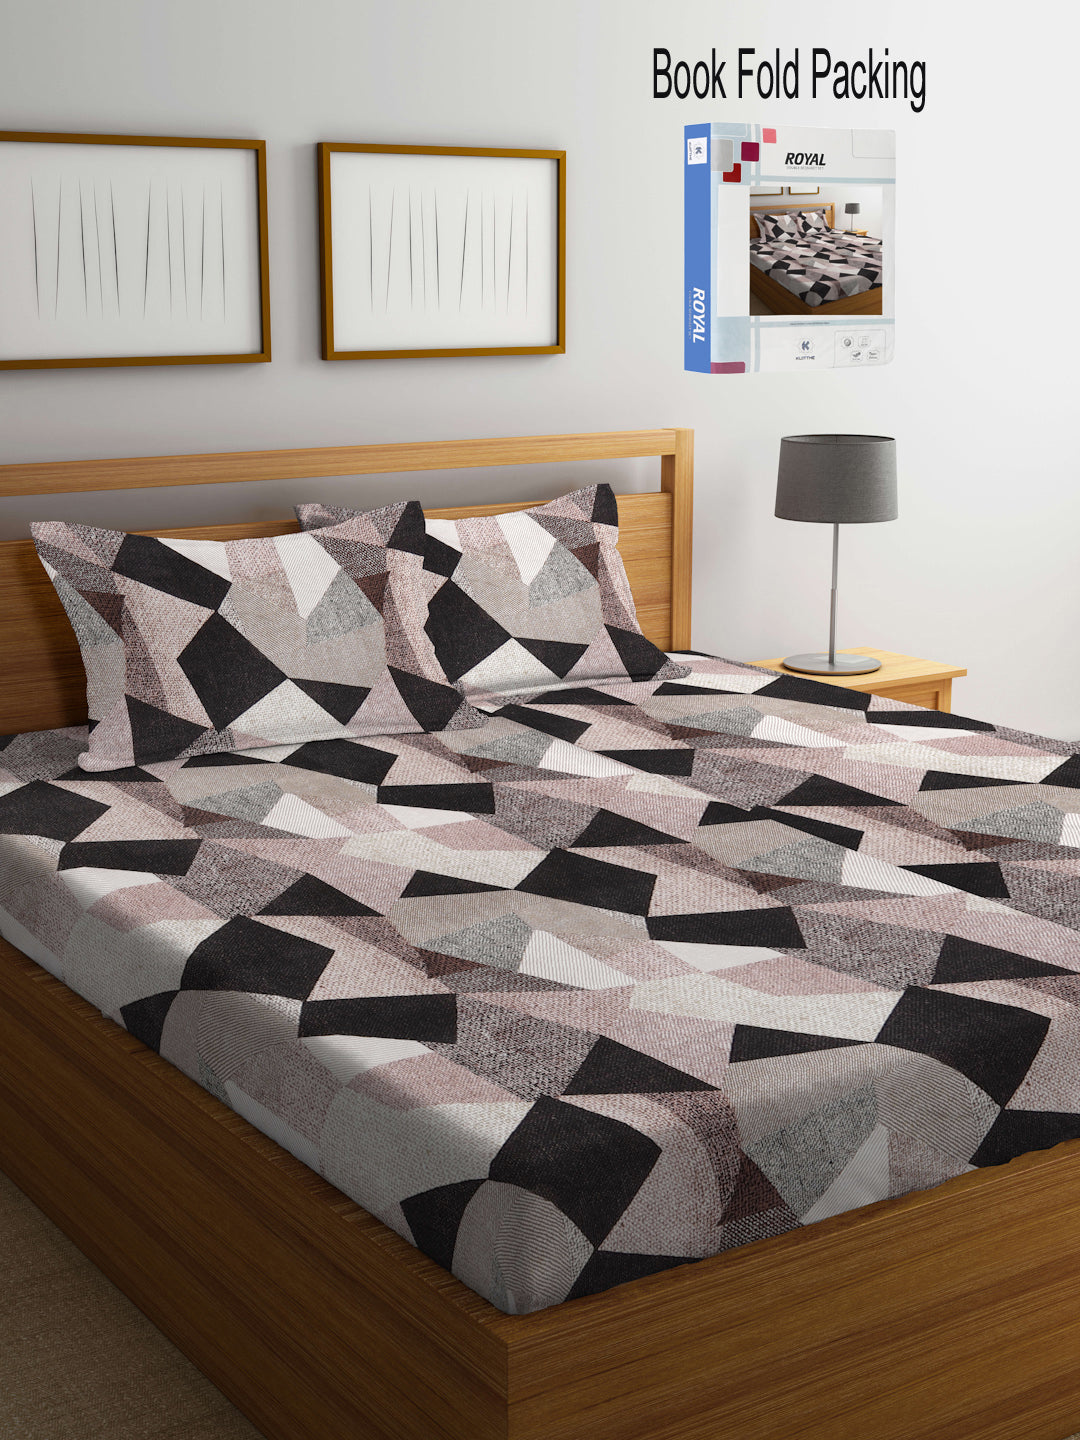 Klotthe Multi Abstract 300 TC Cotton Blend Super King Double Bedsheet Set in Book Fold Packing